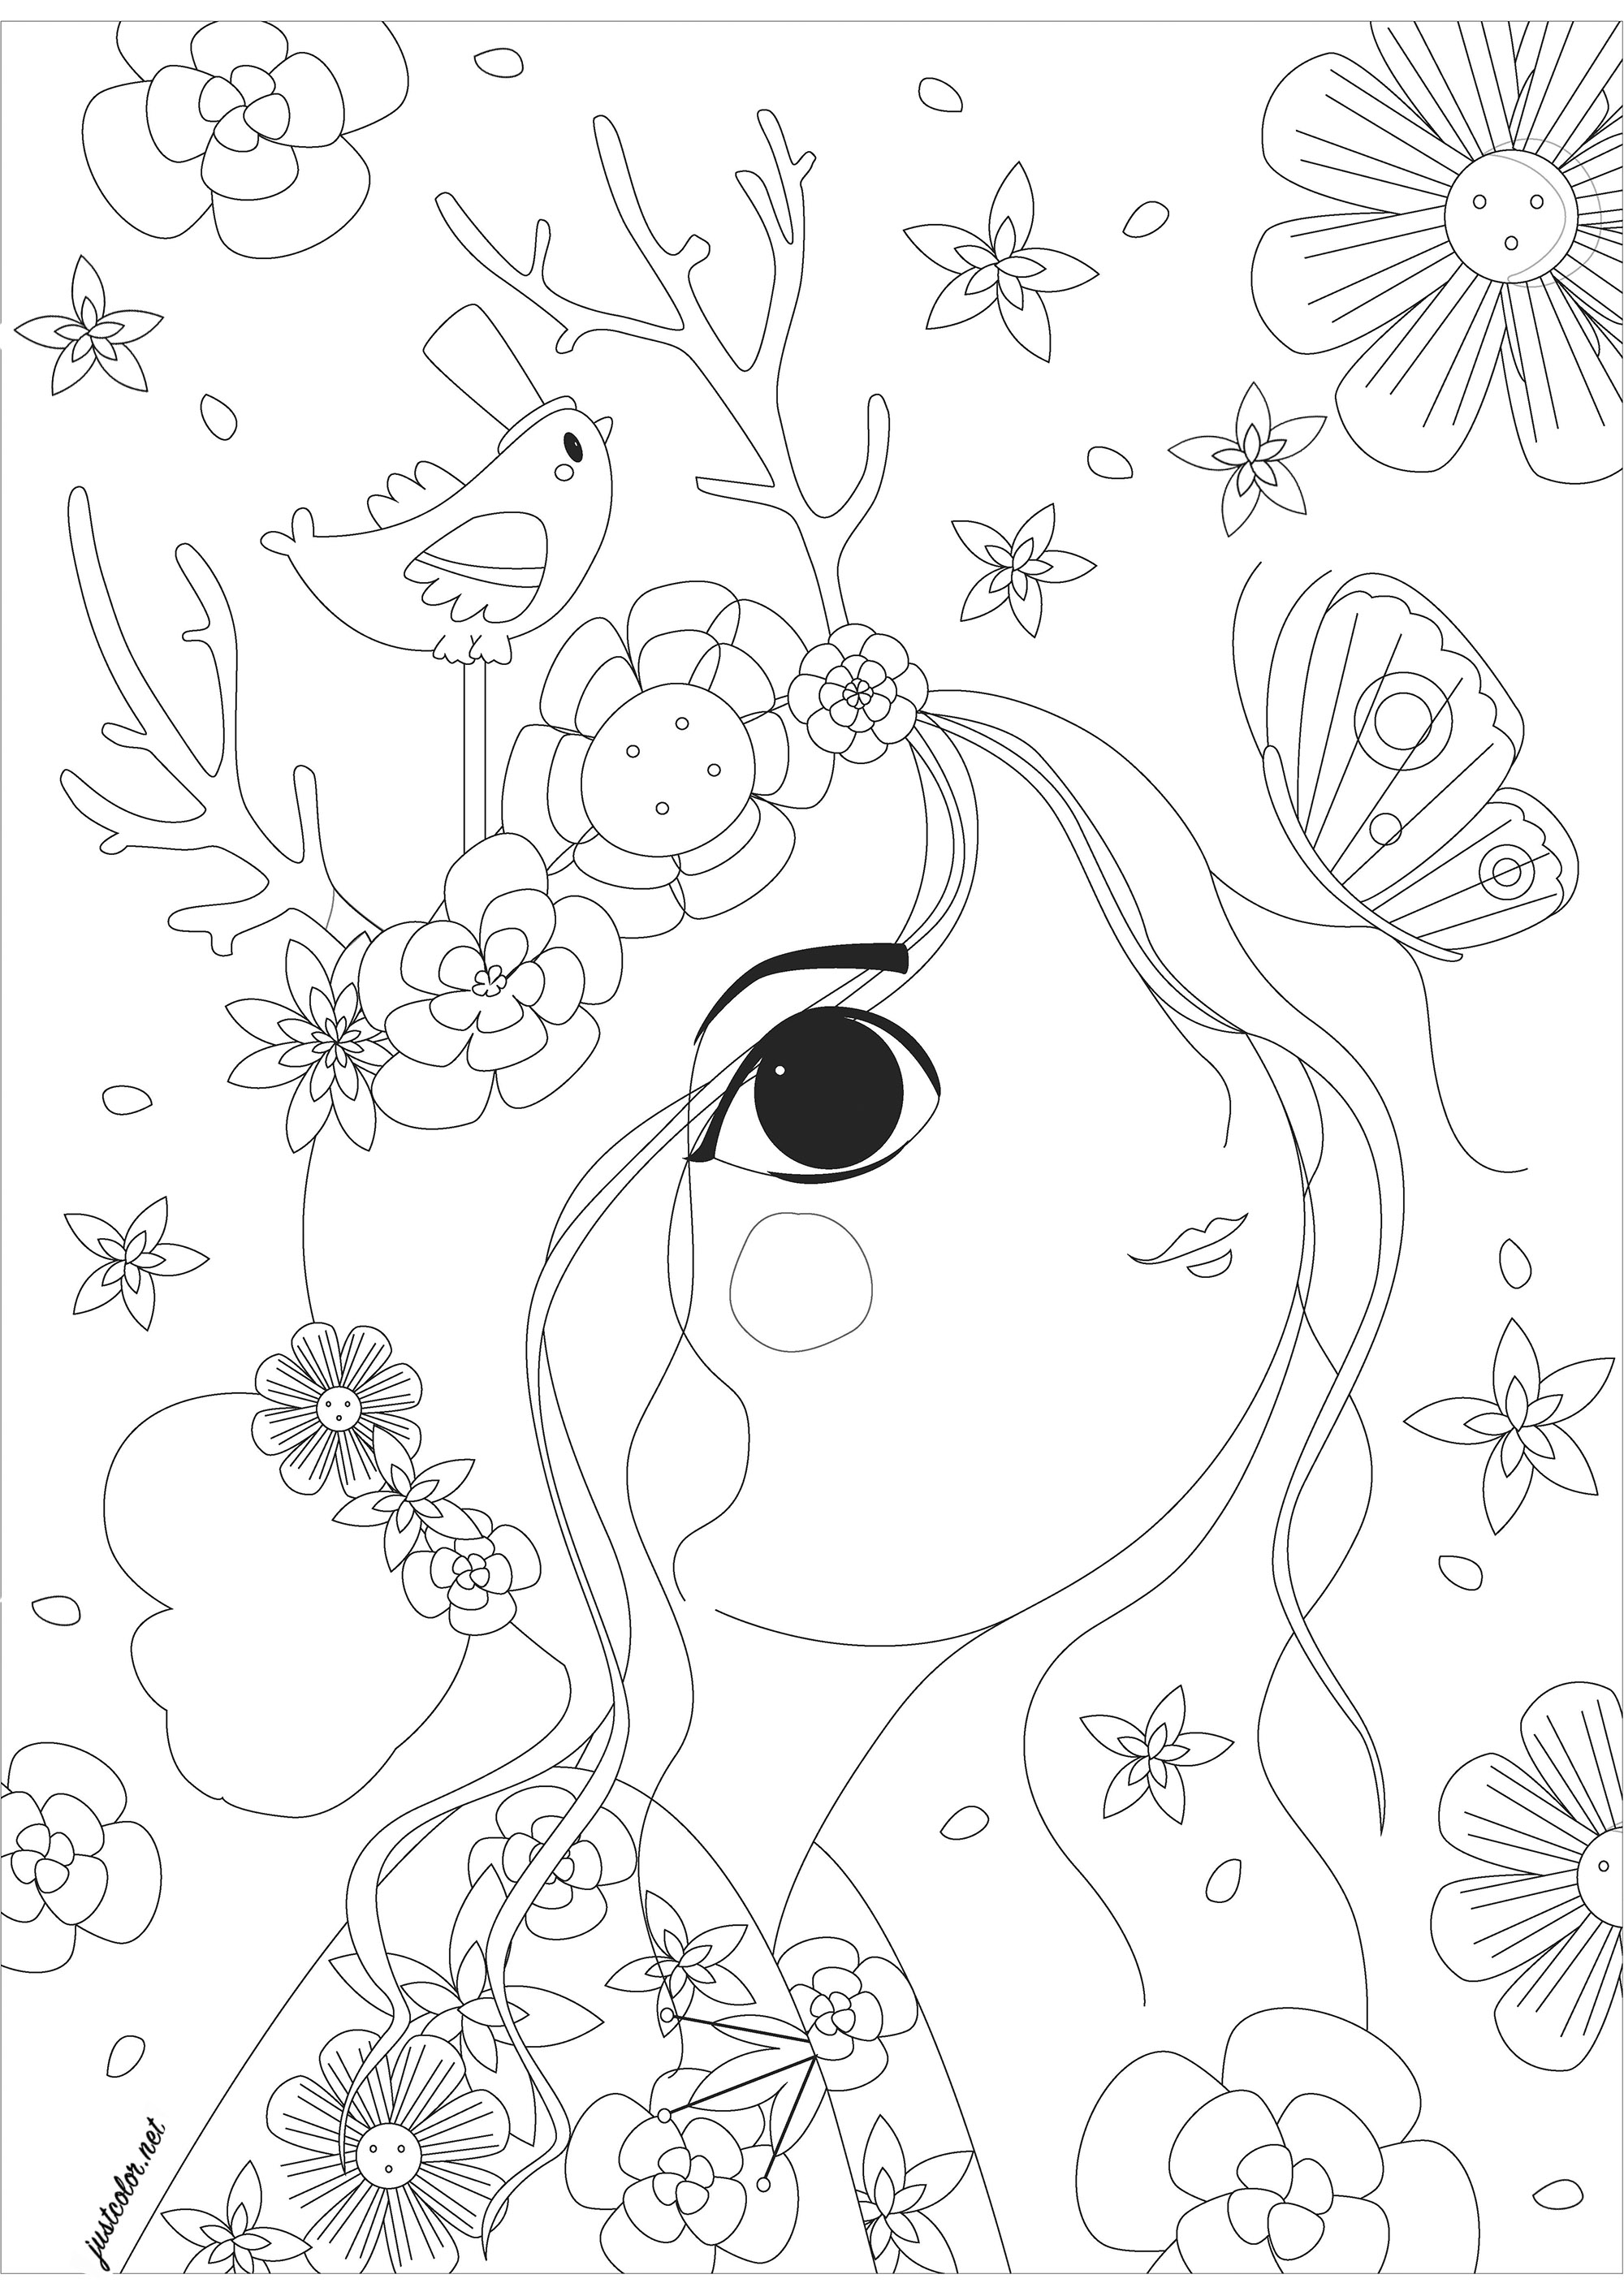 Woman seen in profile looking at a butterfly, surrounded by flowers. A very soothing coloring page, just waiting for beautiful colors for all those flowers, butterfly, pretty little bird and female character drawn with a unique style, Artist : Gaelle Picard